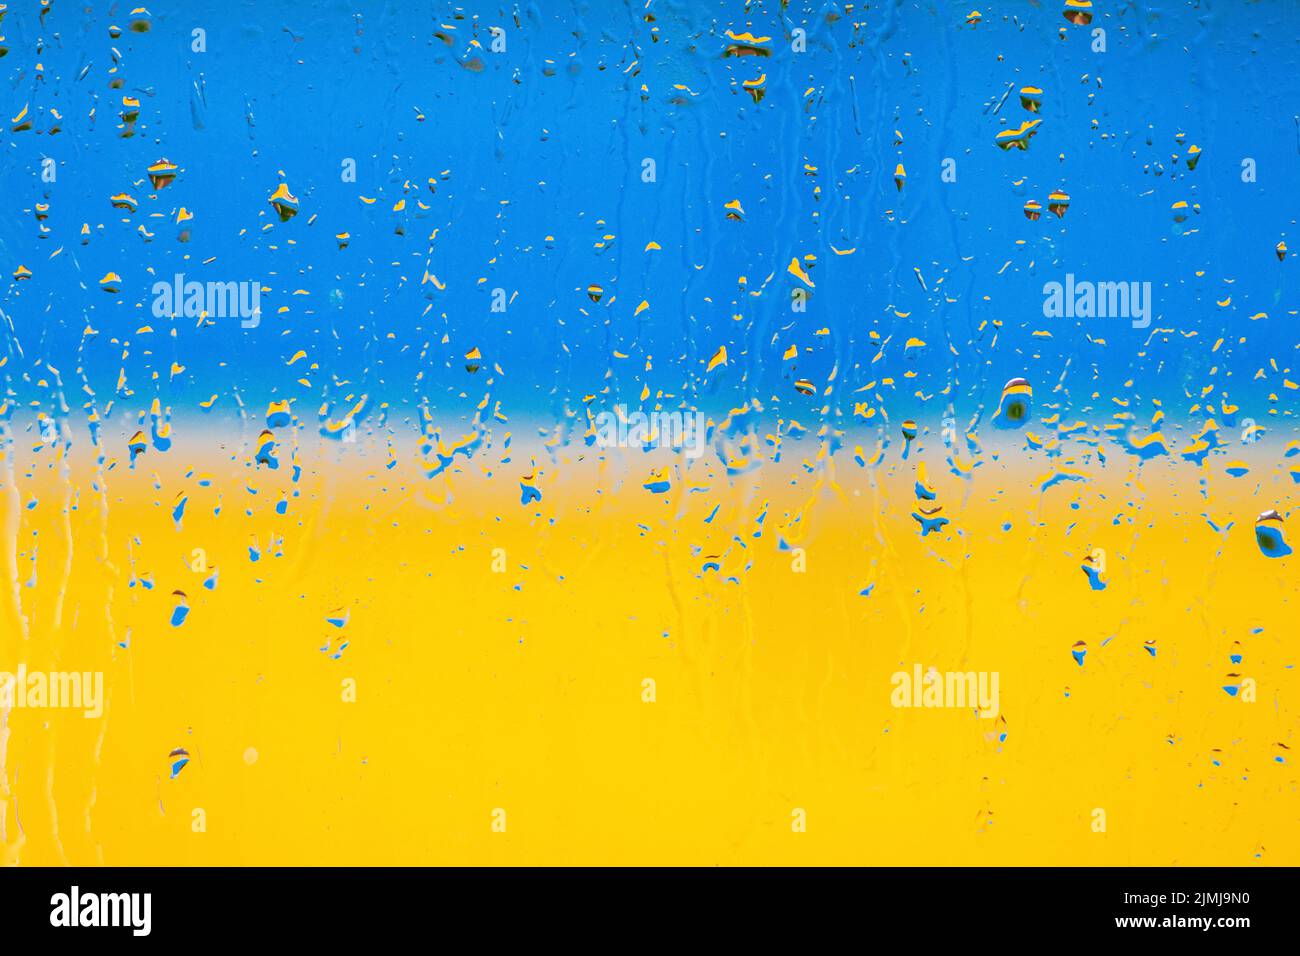 Flag of Ukraine. Abstraction. Raindrops on glass. Bright blue and yellow colors Stock Photo